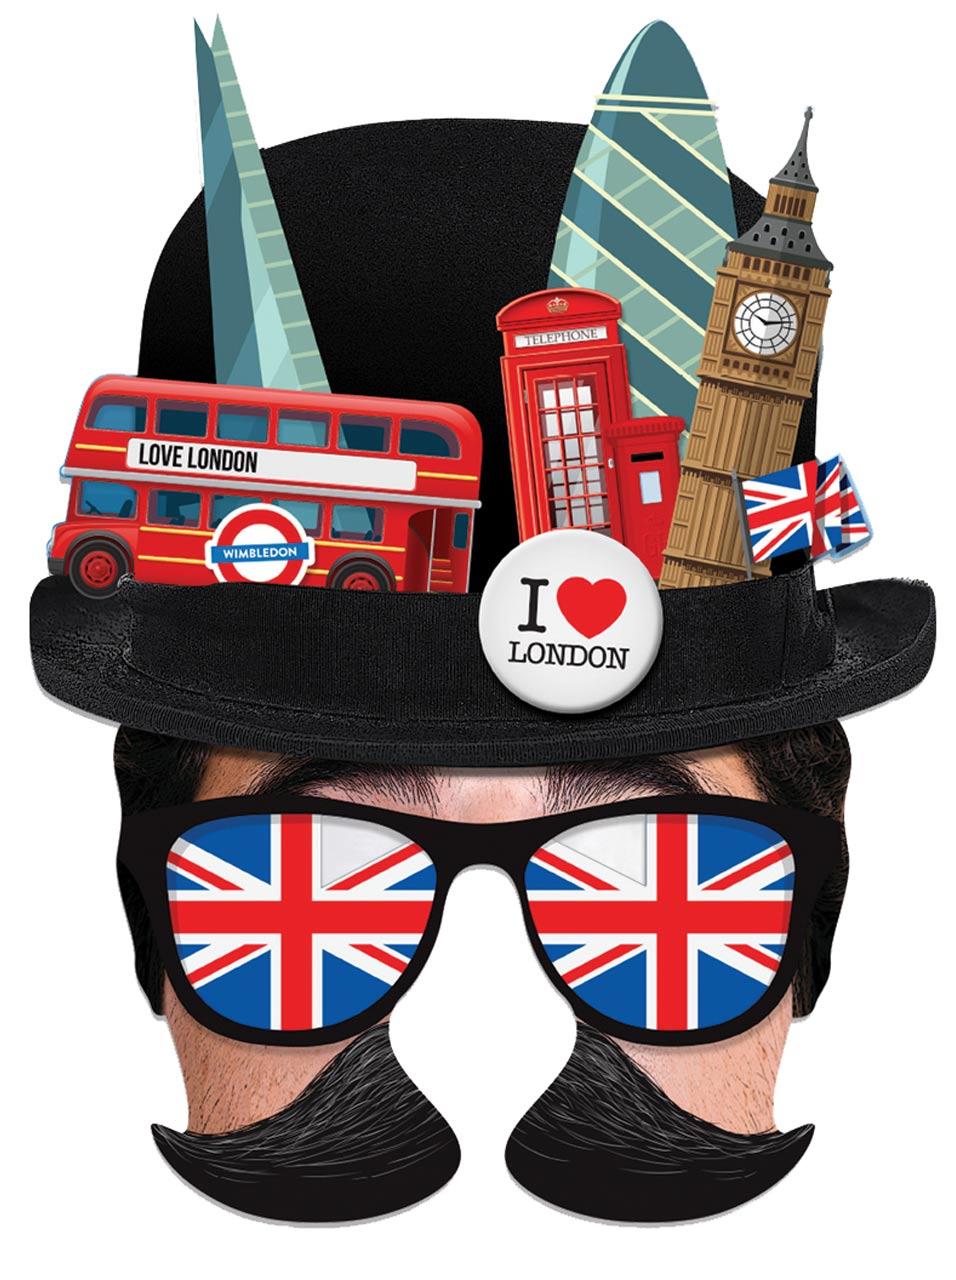 London Bowler Hat Tourist Half-Face Mask by Mask-arade LONBO01 available here at Karnival Costumes online party shop